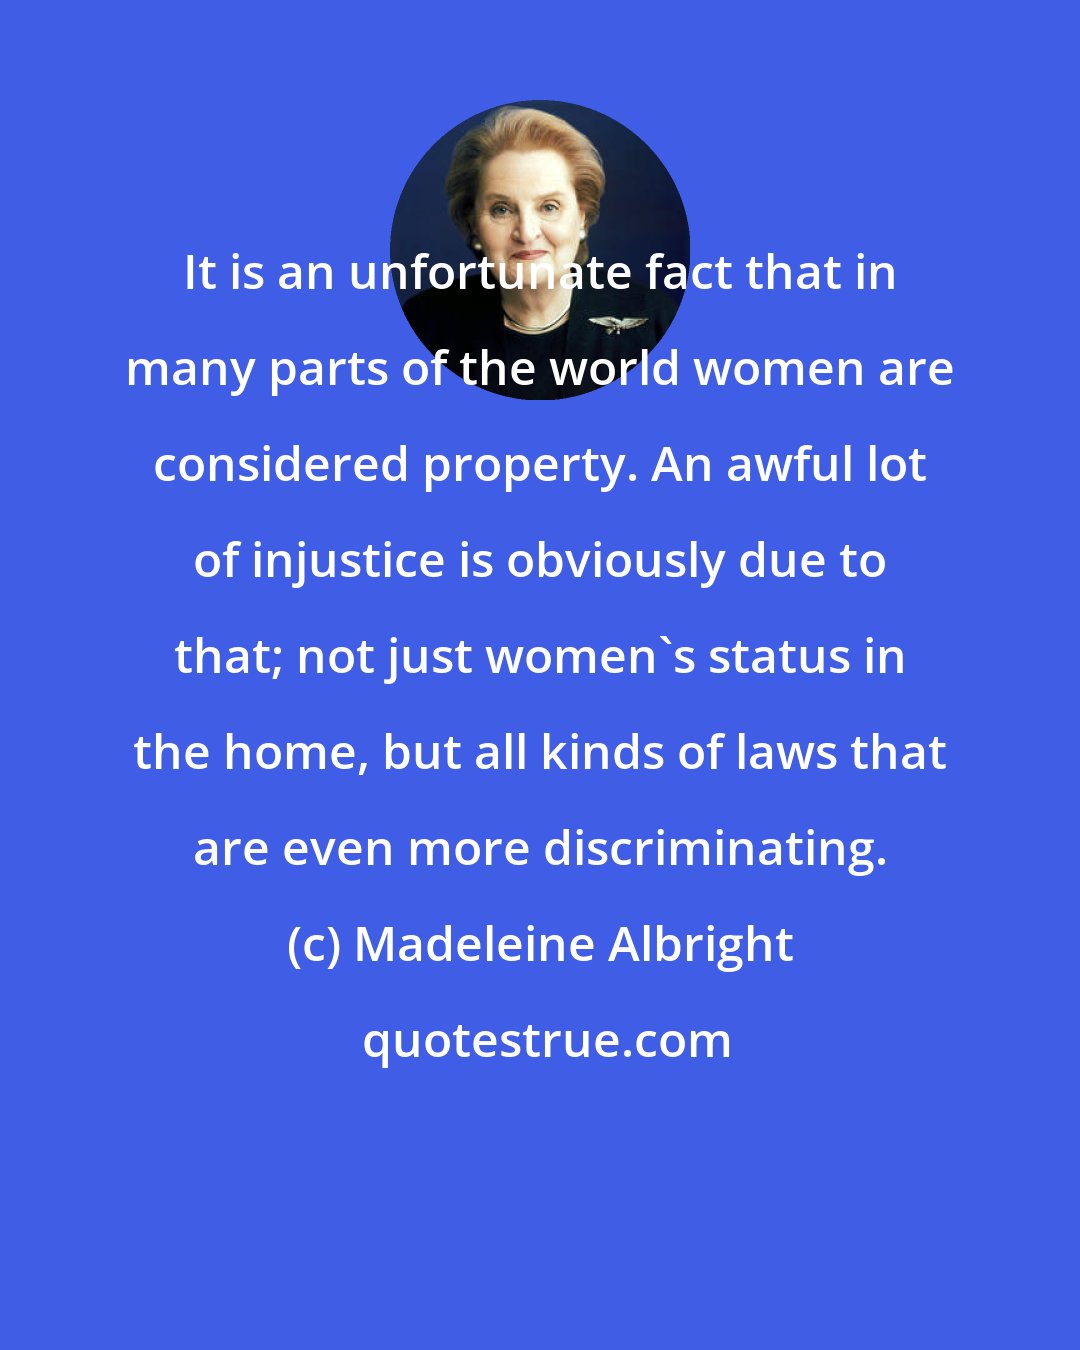 Madeleine Albright: It is an unfortunate fact that in many parts of the world women are considered property. An awful lot of injustice is obviously due to that; not just women's status in the home, but all kinds of laws that are even more discriminating.